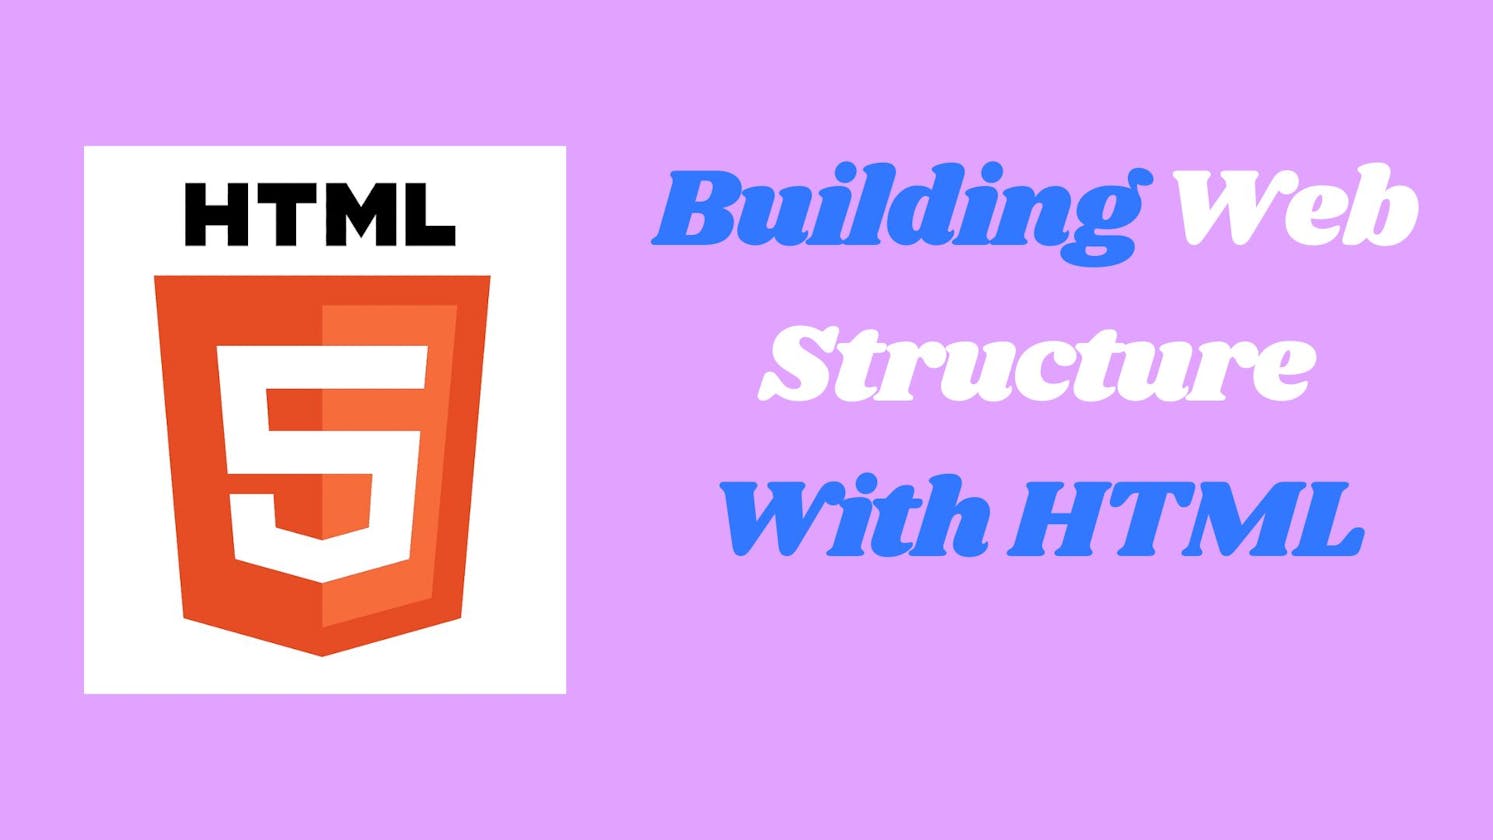 Building Web Structure with HTML: Headings, Paragraphs, and Text Styles